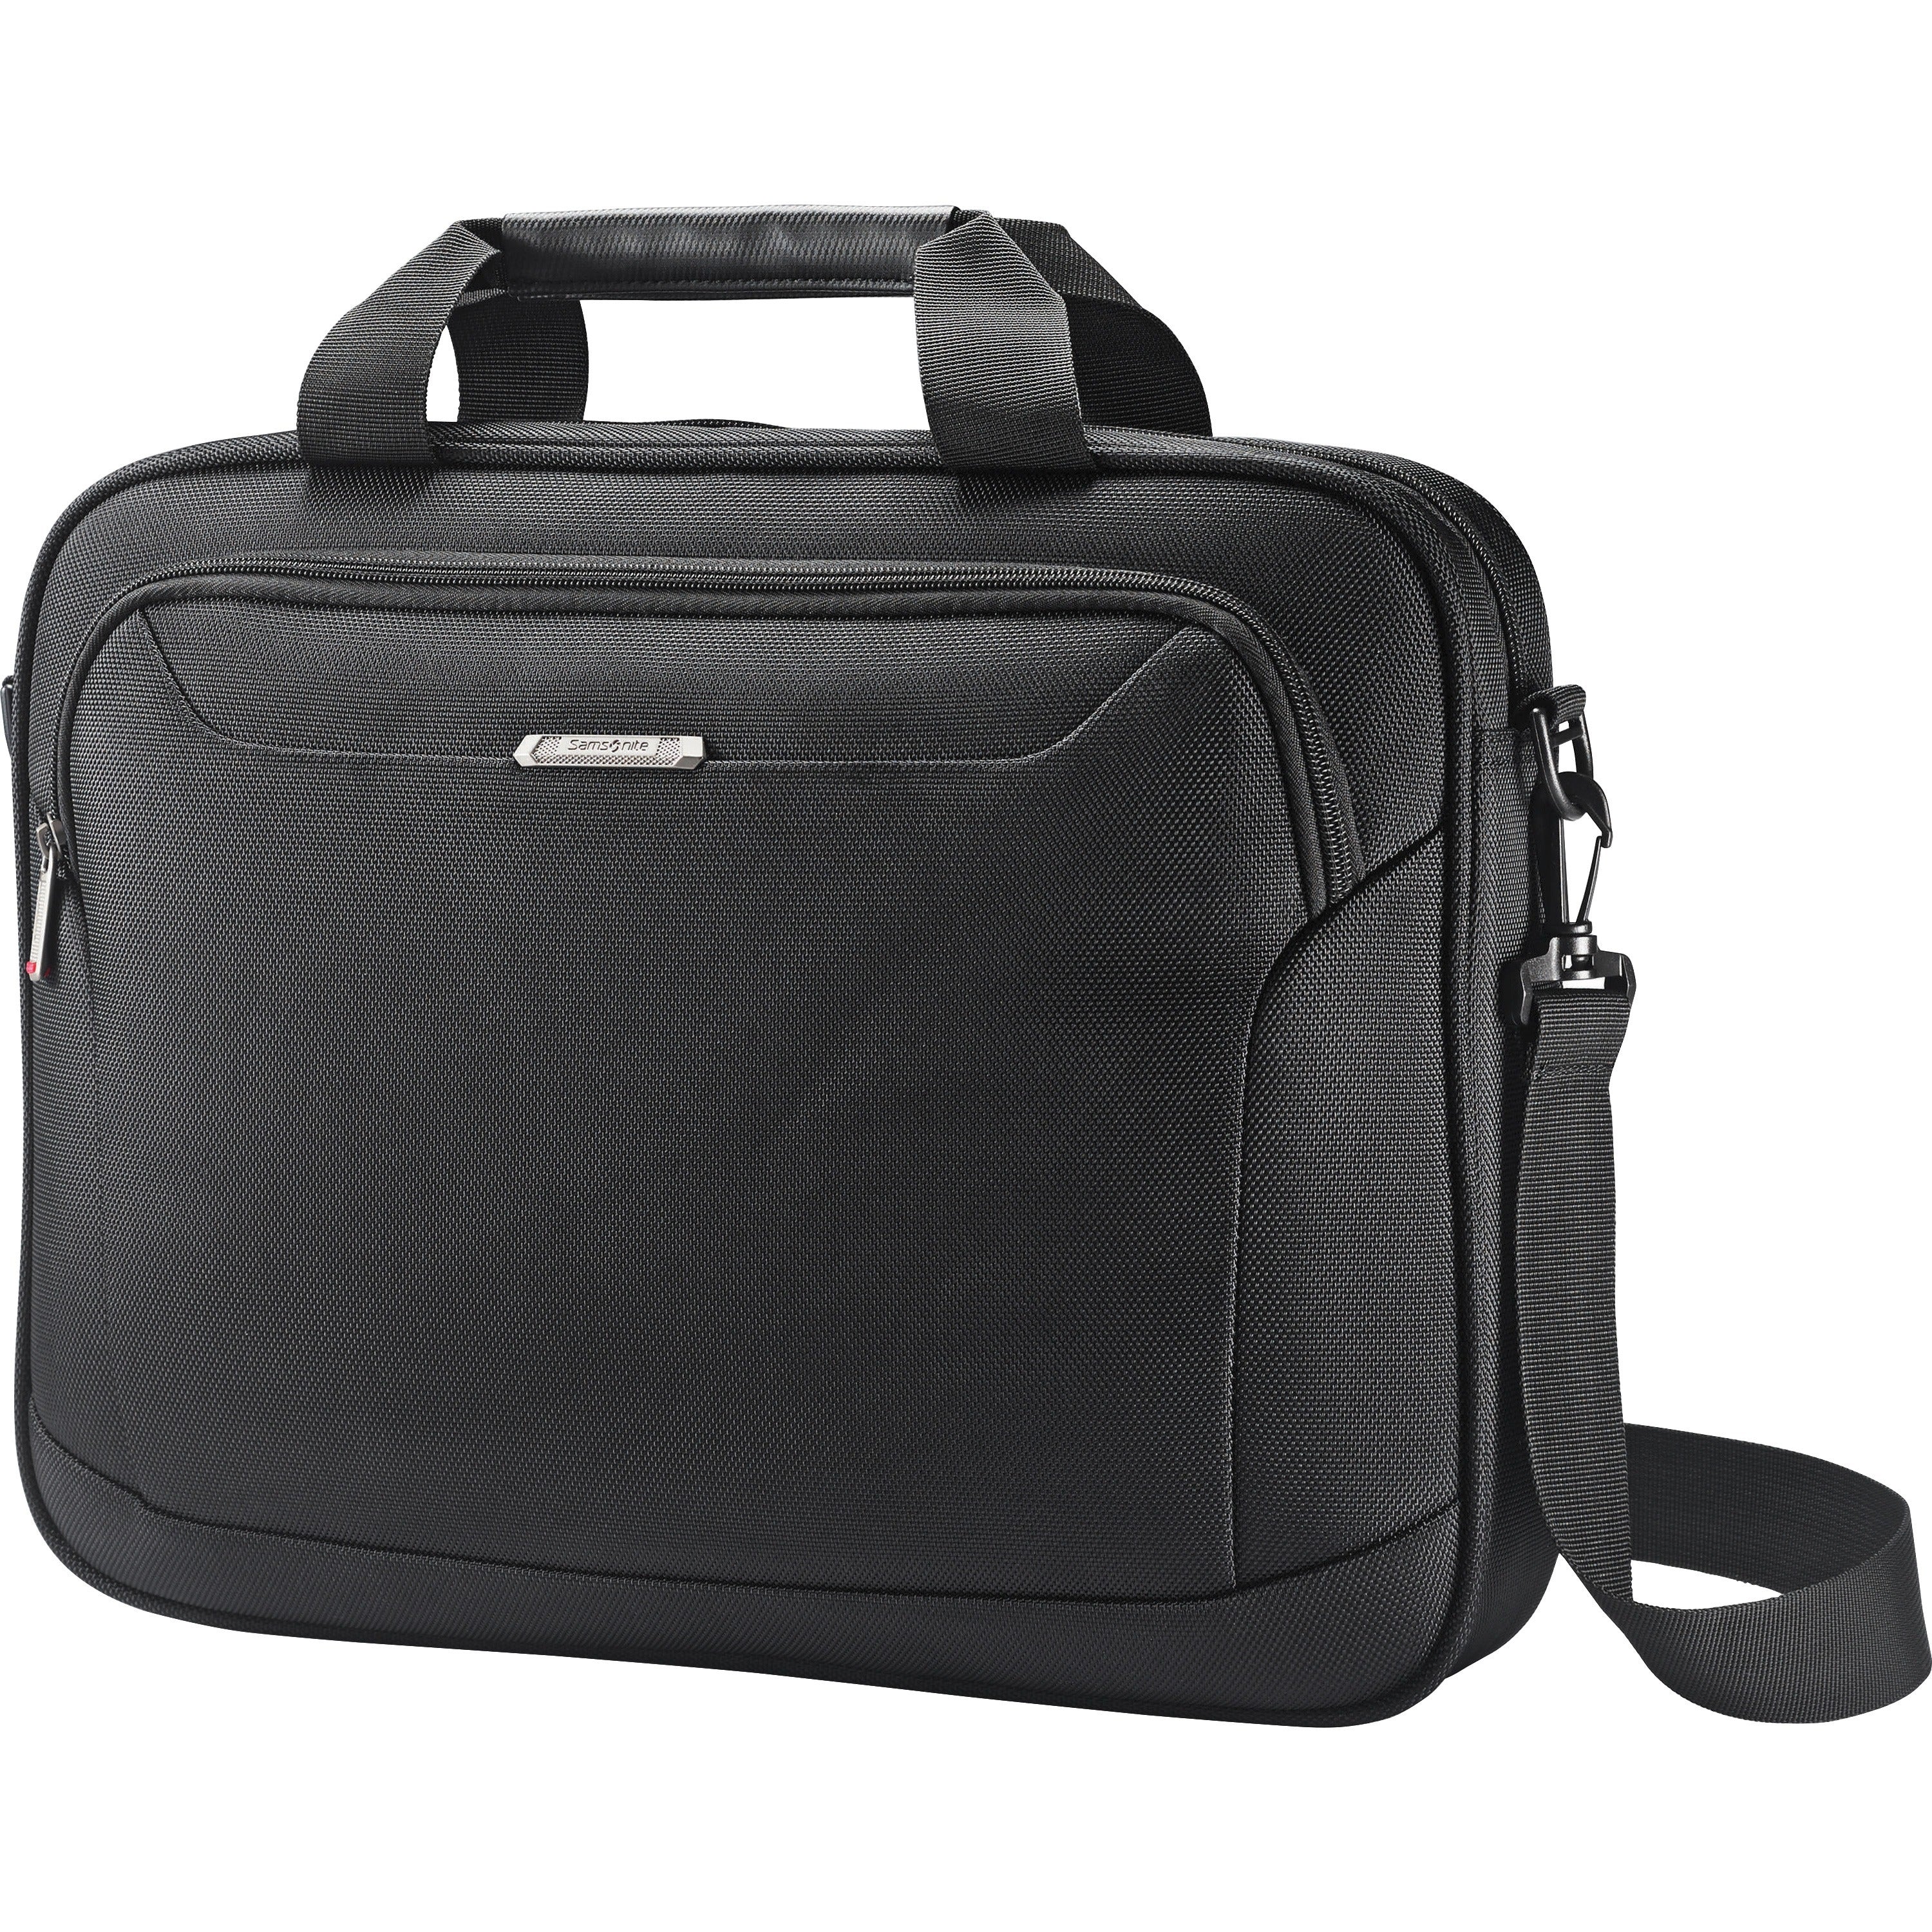 samsonite-xenon-carrying-case-for-156-notebook-black-drop-resistant-interior-shock-resistant-interior-1680d-ballistic-nylon-body-tricot-interior-material-128-height-x-163-width-x-2-depth-1-each_sml894411041 - 1